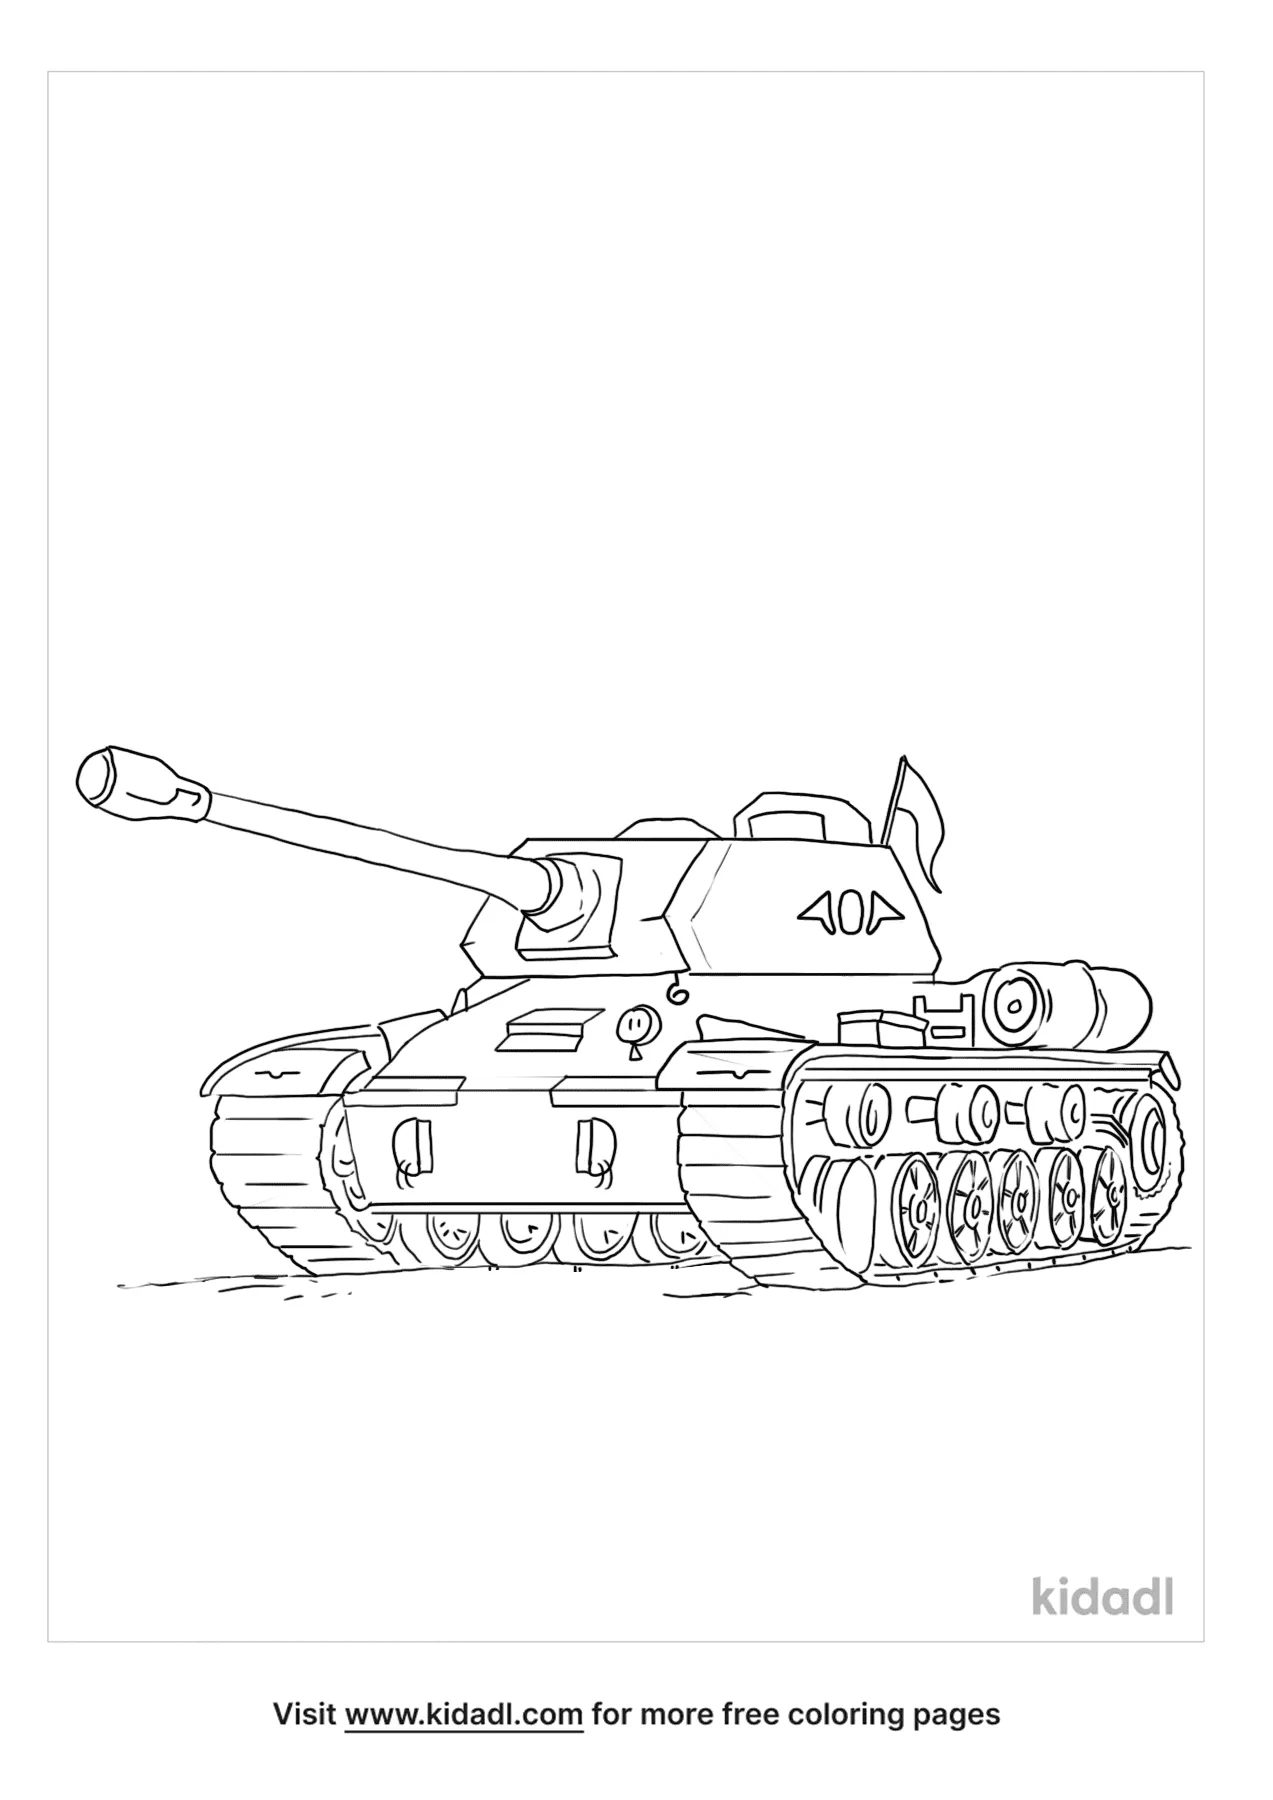 Military Vehicle Coloring Page